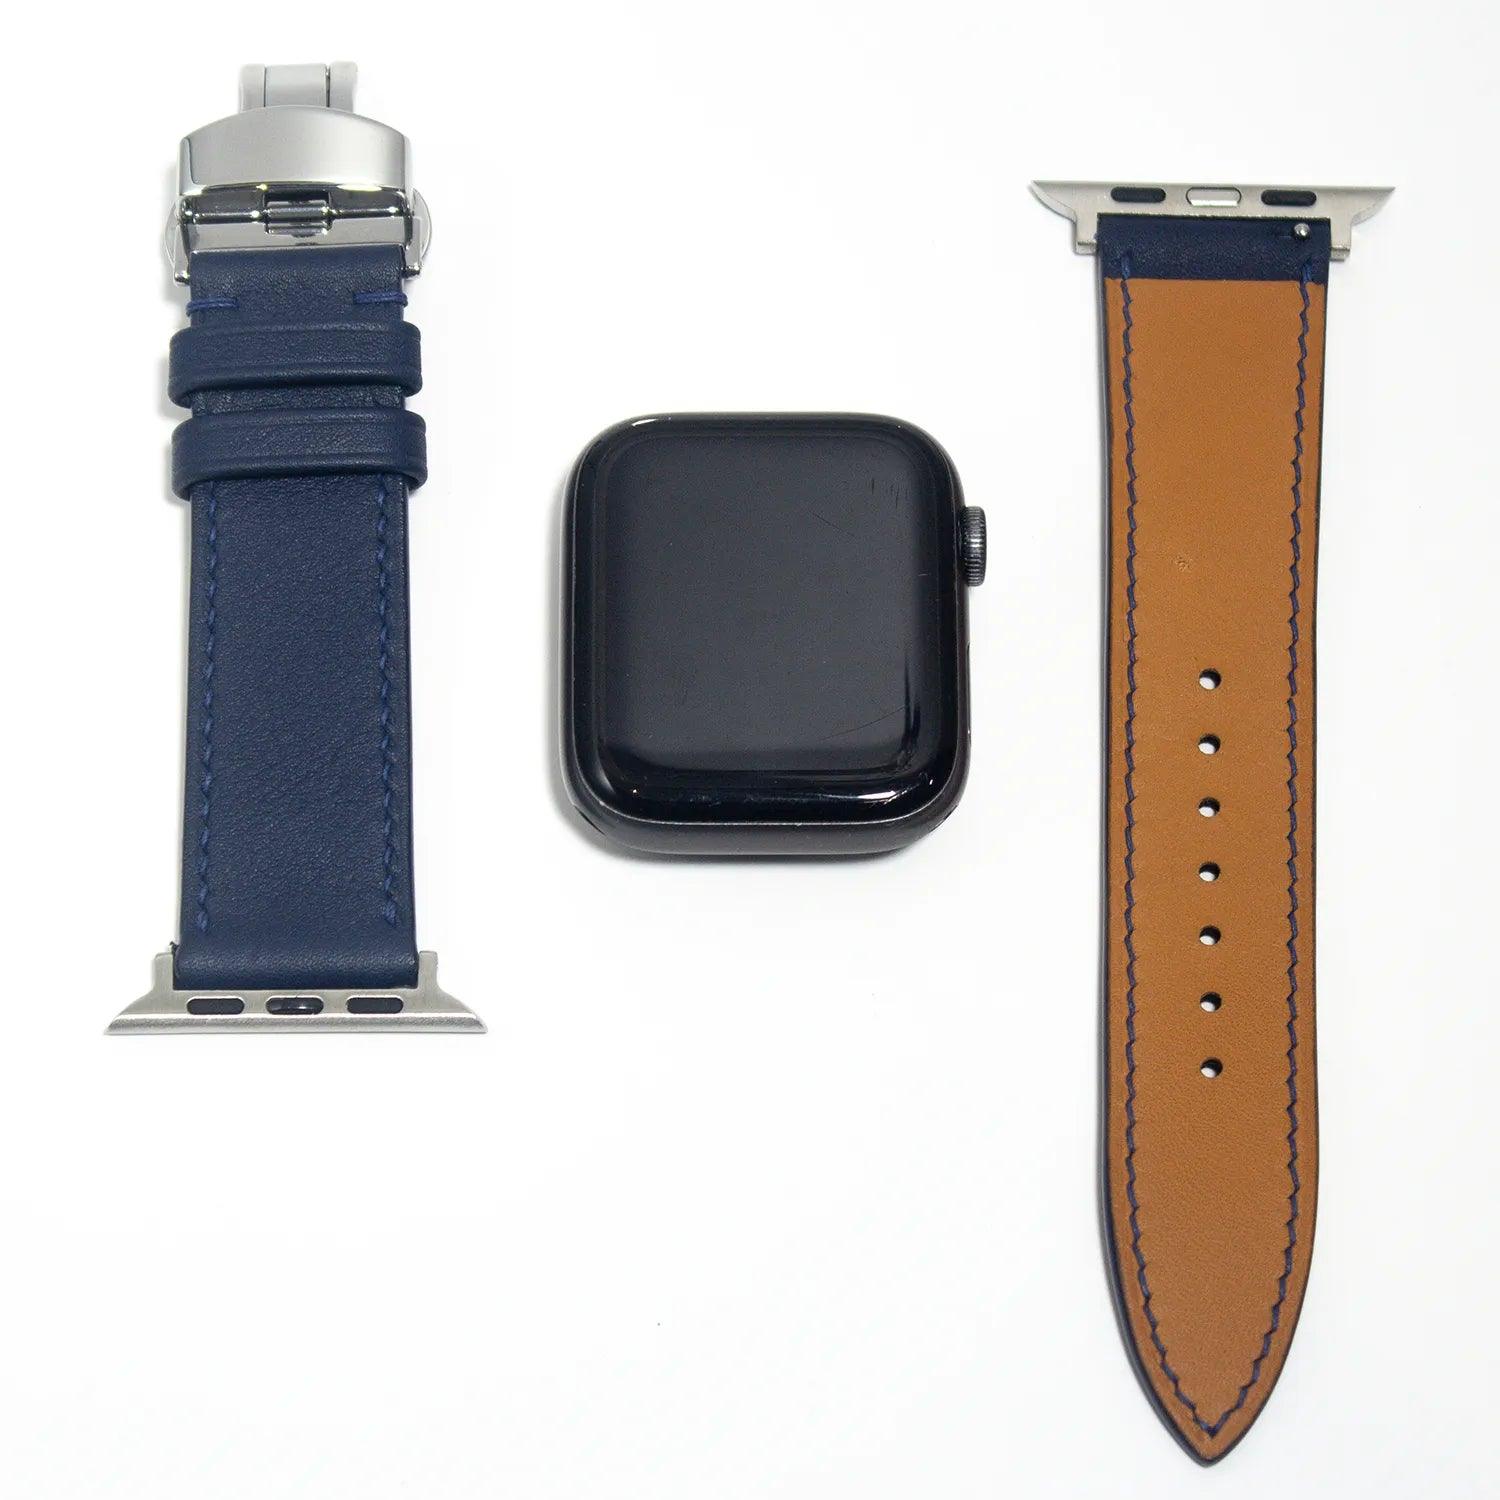 Durable leather watch straps in rich navy blue Swift leather, ideal for achieving a look of classic elegance.